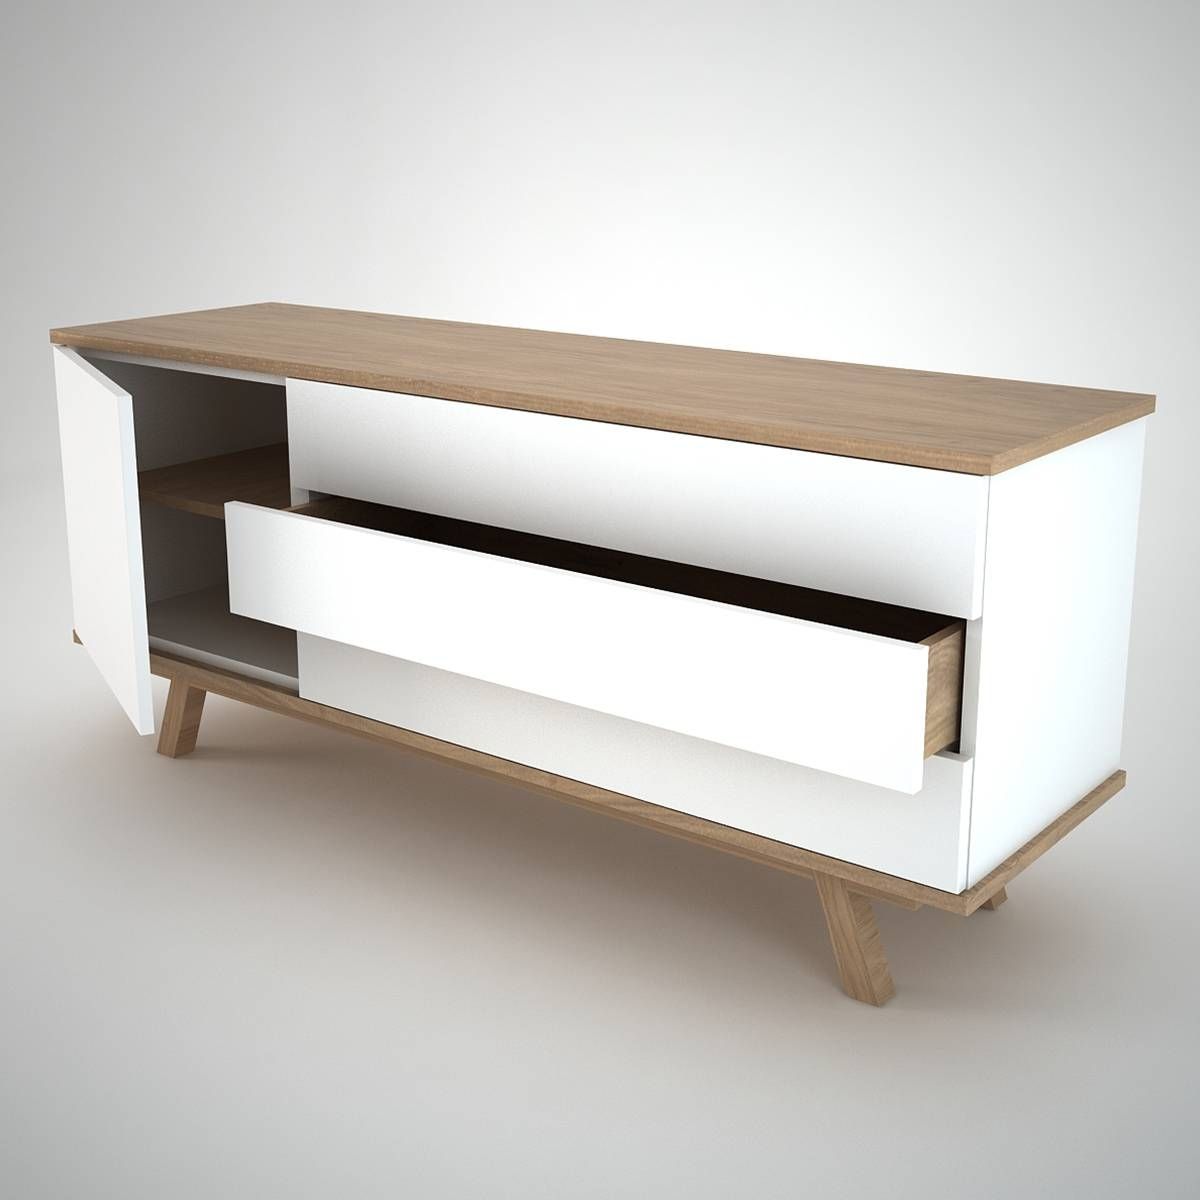 Furniture: Ottawa Modern Sideboard White Join Furniture And Tall Regarding White And Wood Sideboard (View 10 of 20)